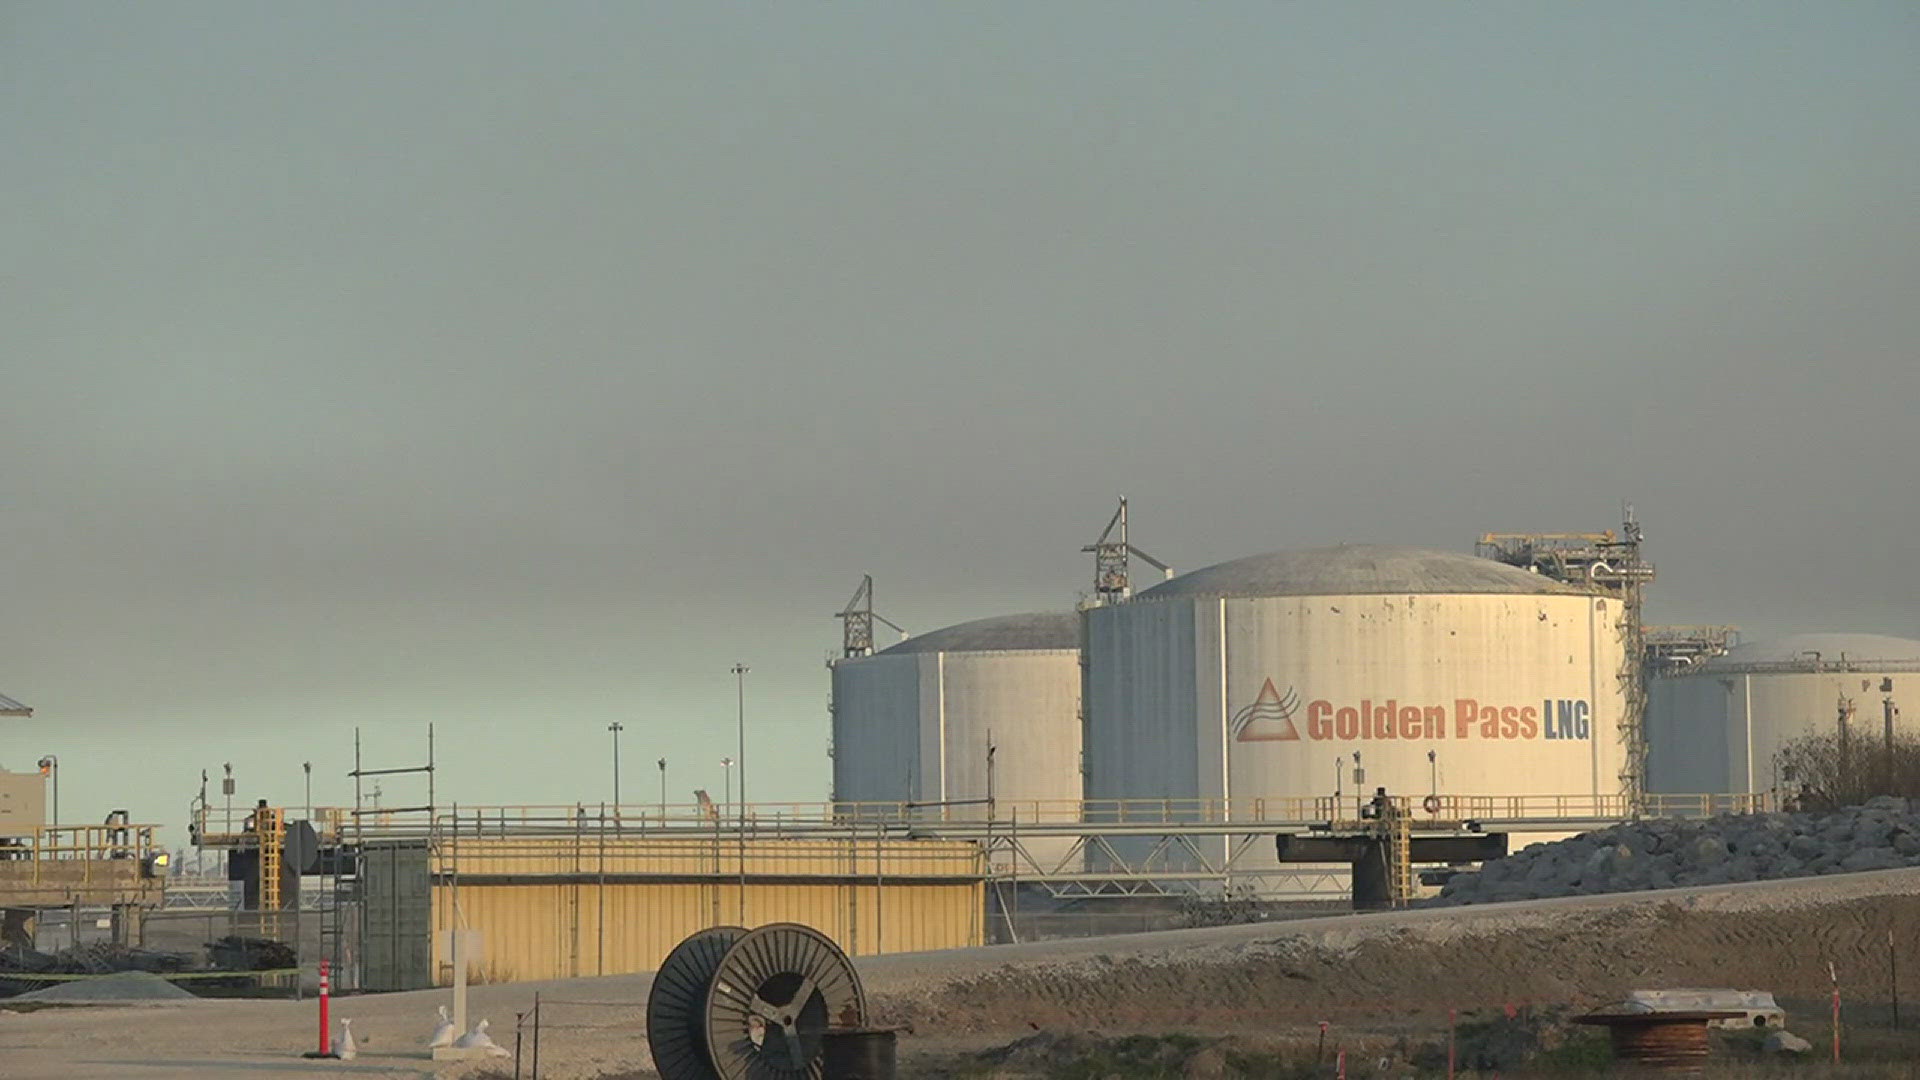 A number of furloughed contract workers with the Zachry Group are set to return to work at Golden Pass LNG Monday amid ongoing contract issues.